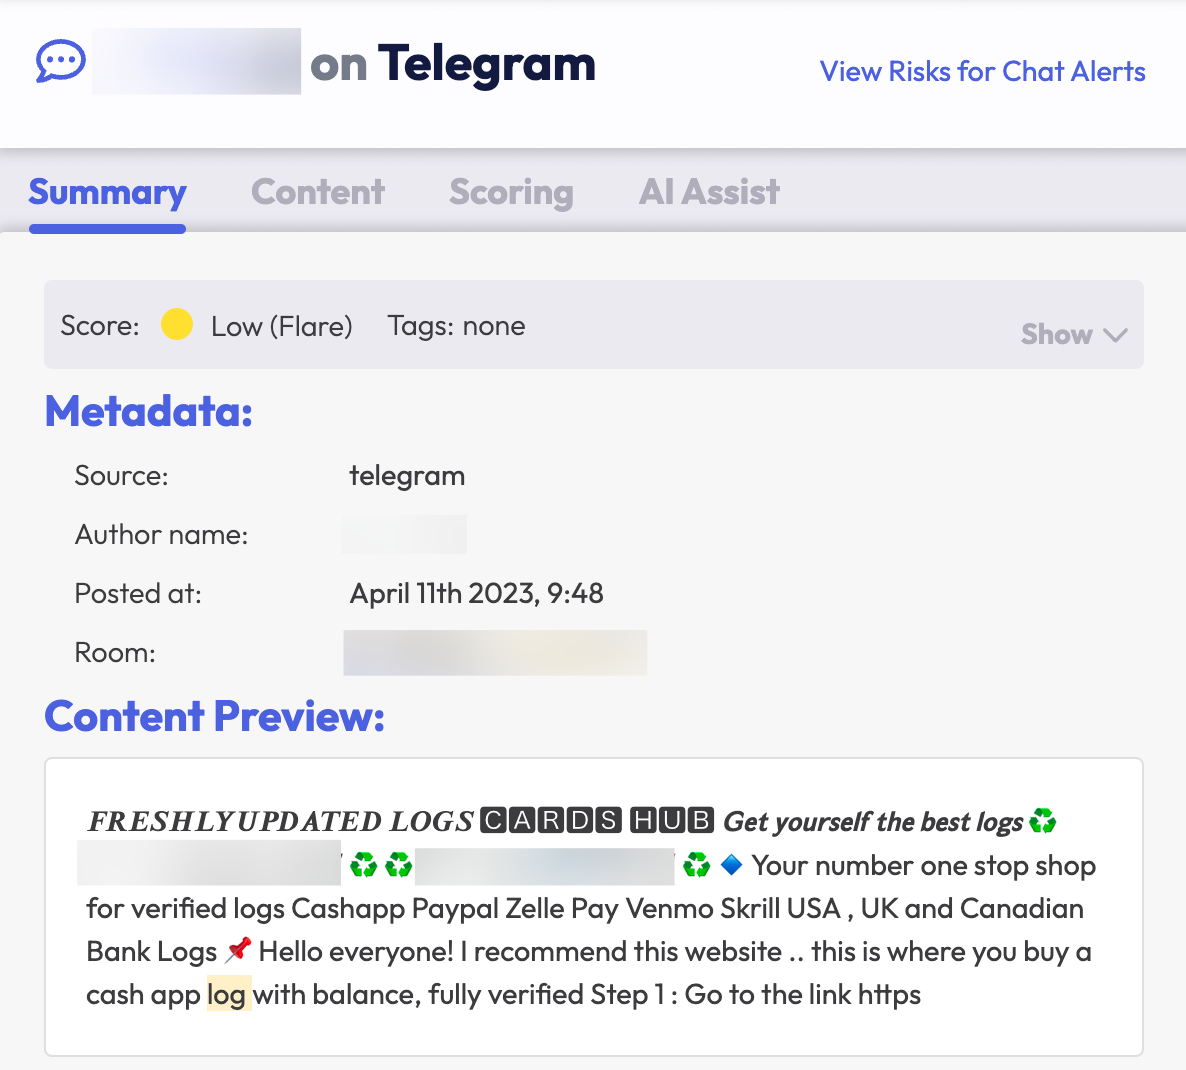 A Telegram message screenshot from Flare. The background is a light gray with black text. The Content Preview shows a post advertising freshly updated logs. 